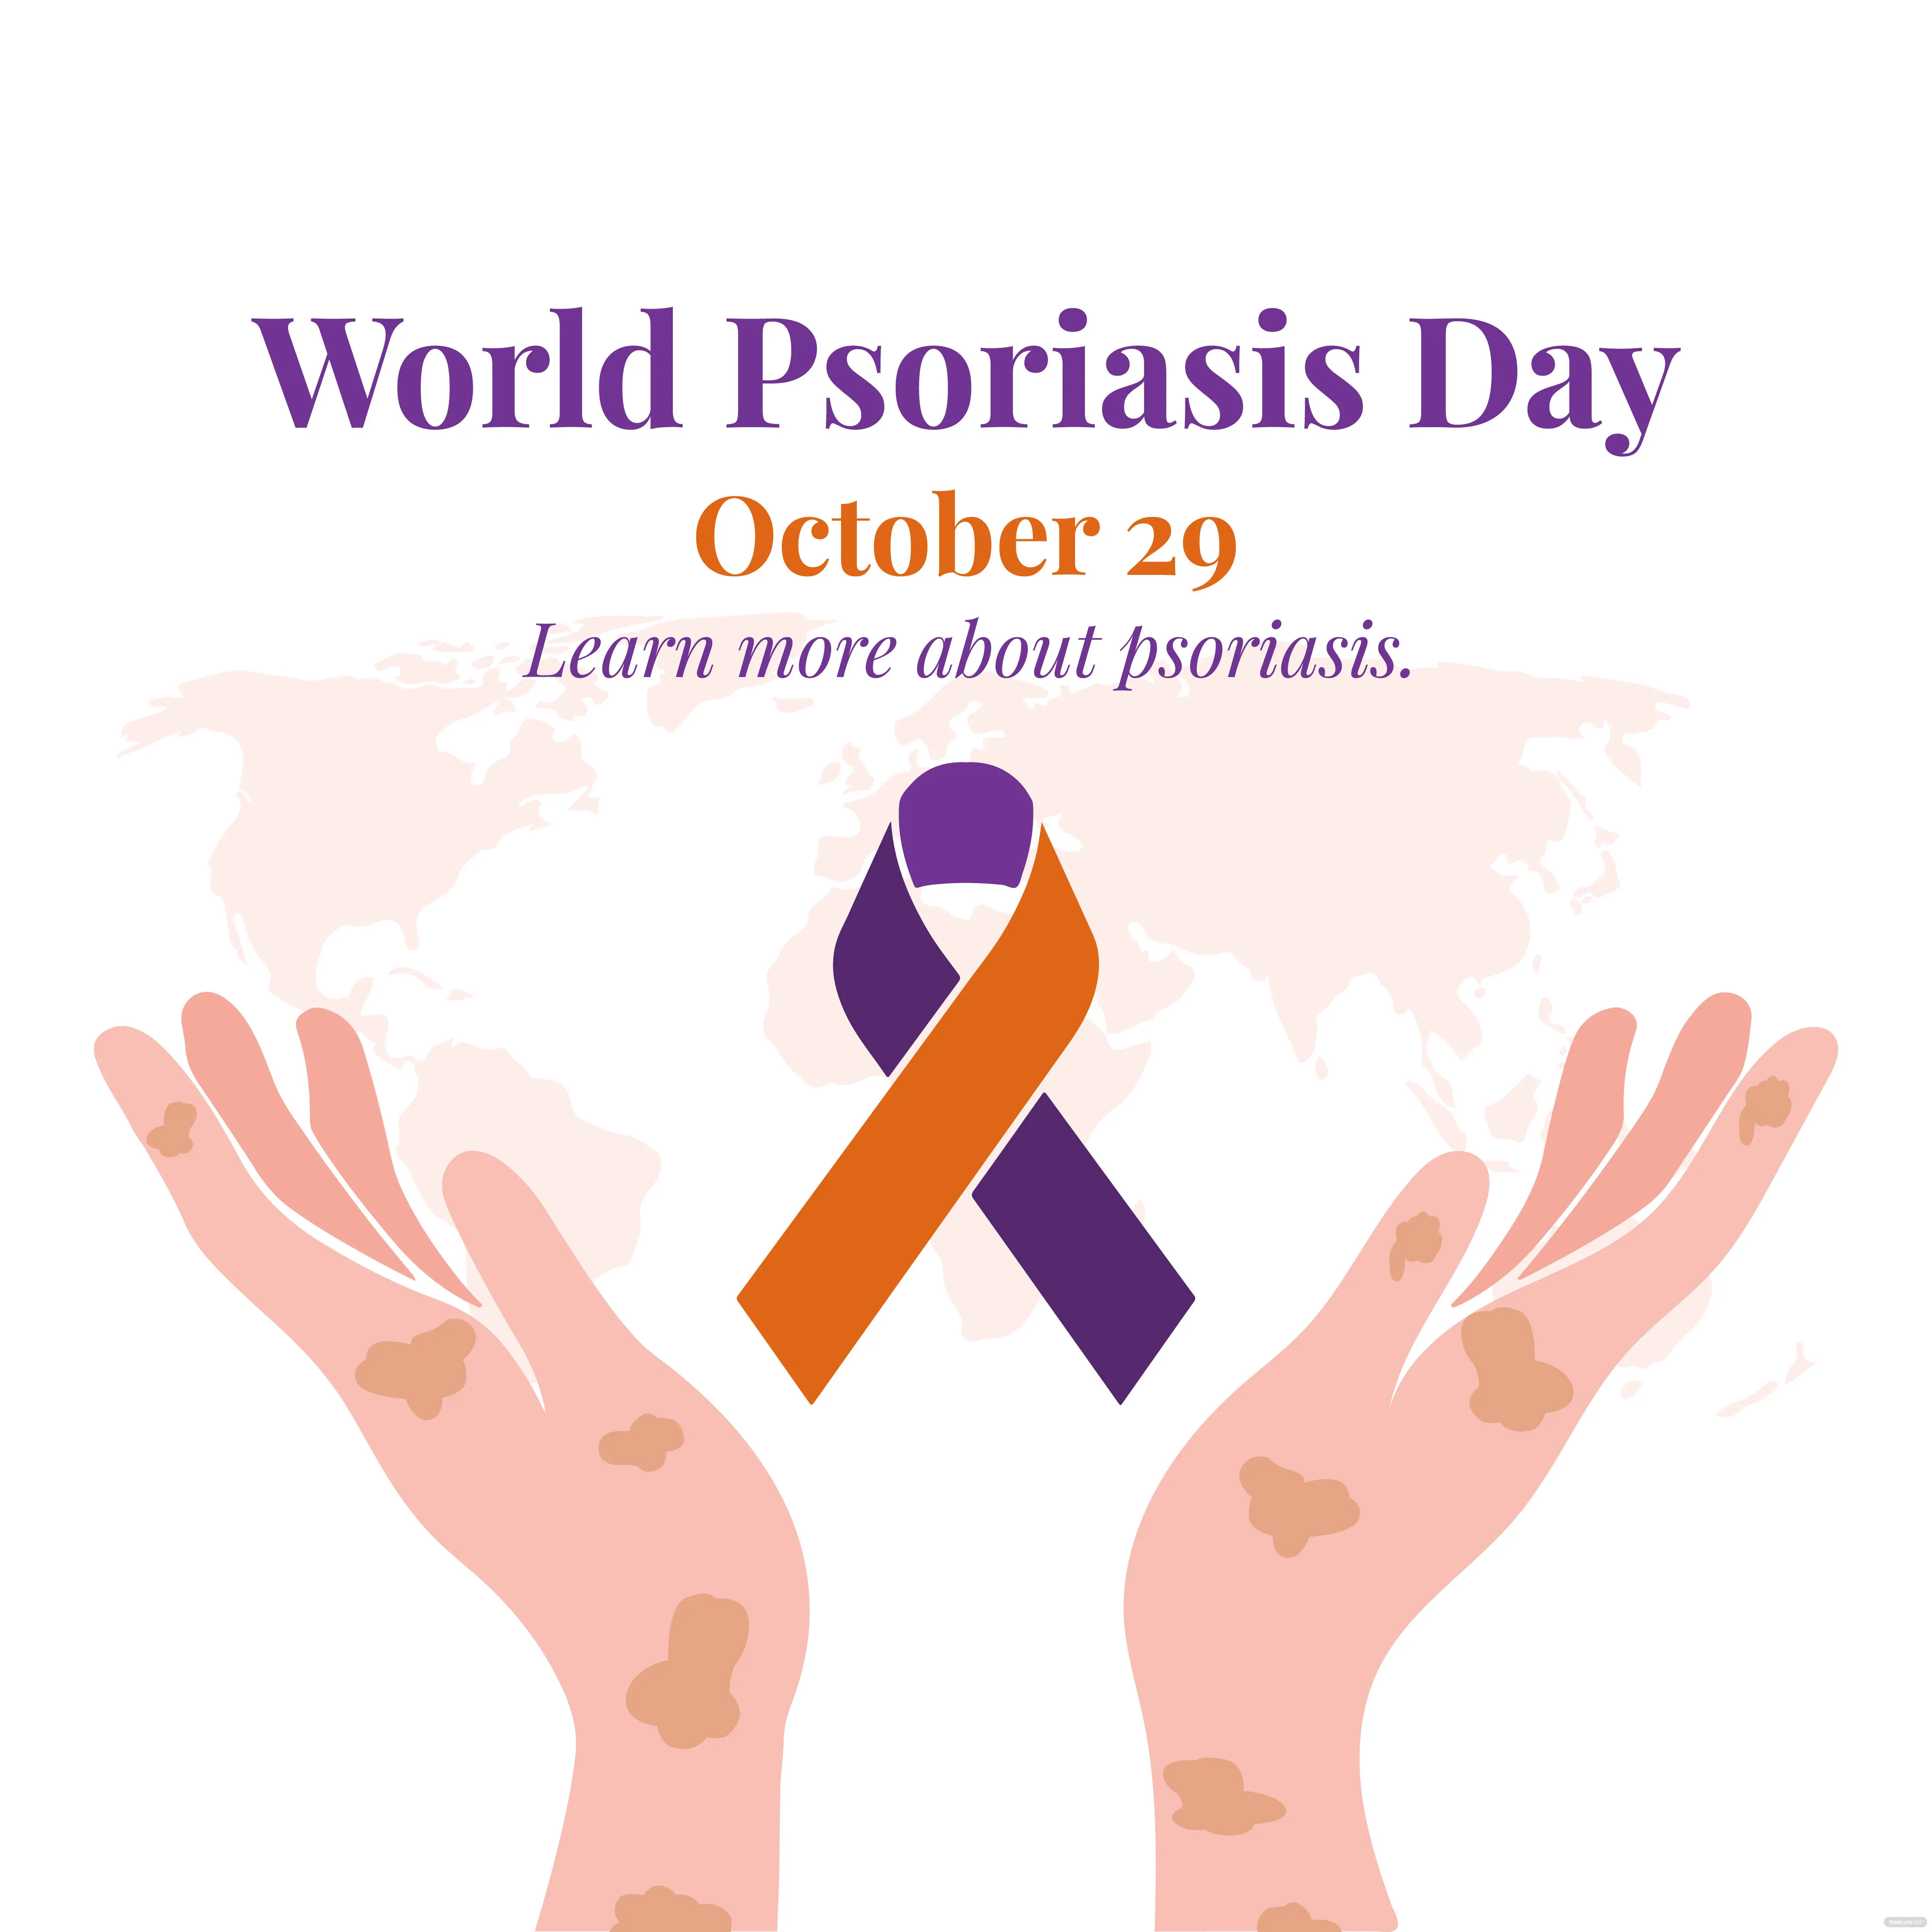 world psoriasis day instagram post ideas examples